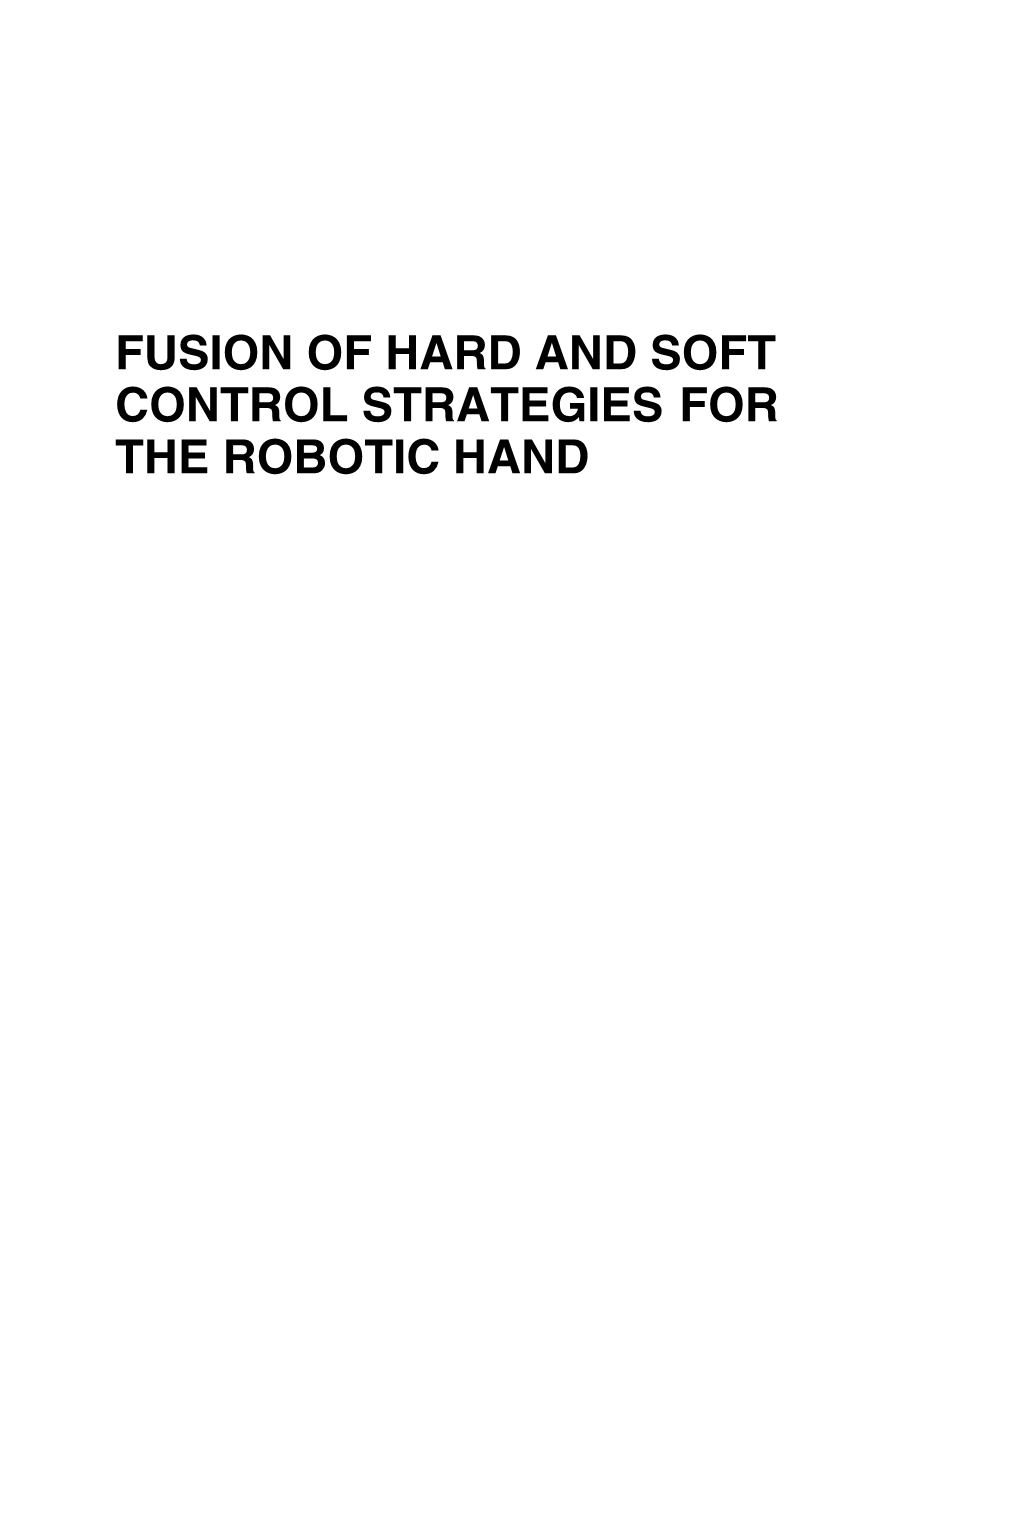 FUSION of HARD and SOFT CONTROL STRATEGIES for the ROBOTIC HAND IEEE Press 445 Hoes Lane Piscataway, NJ 08854